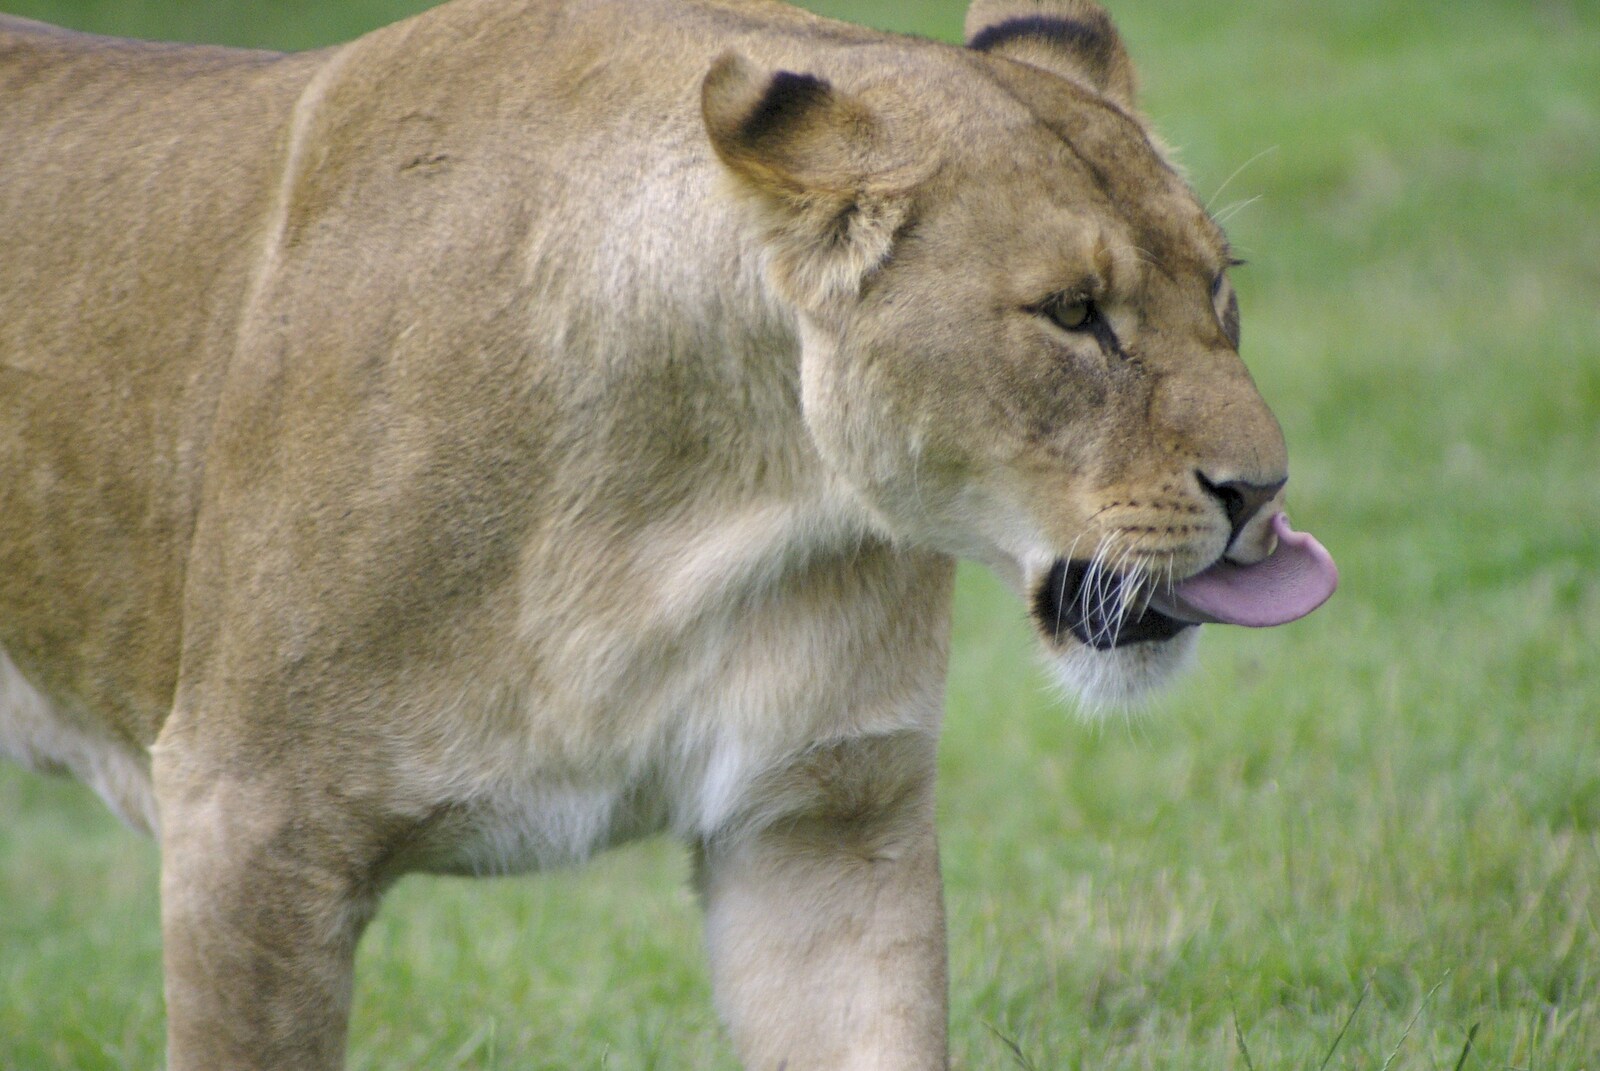 A female lion licks her chops from The BBs in a Garden, and a Qualcomm Safari, Woburn, Bedfordshire - 22nd July 2007